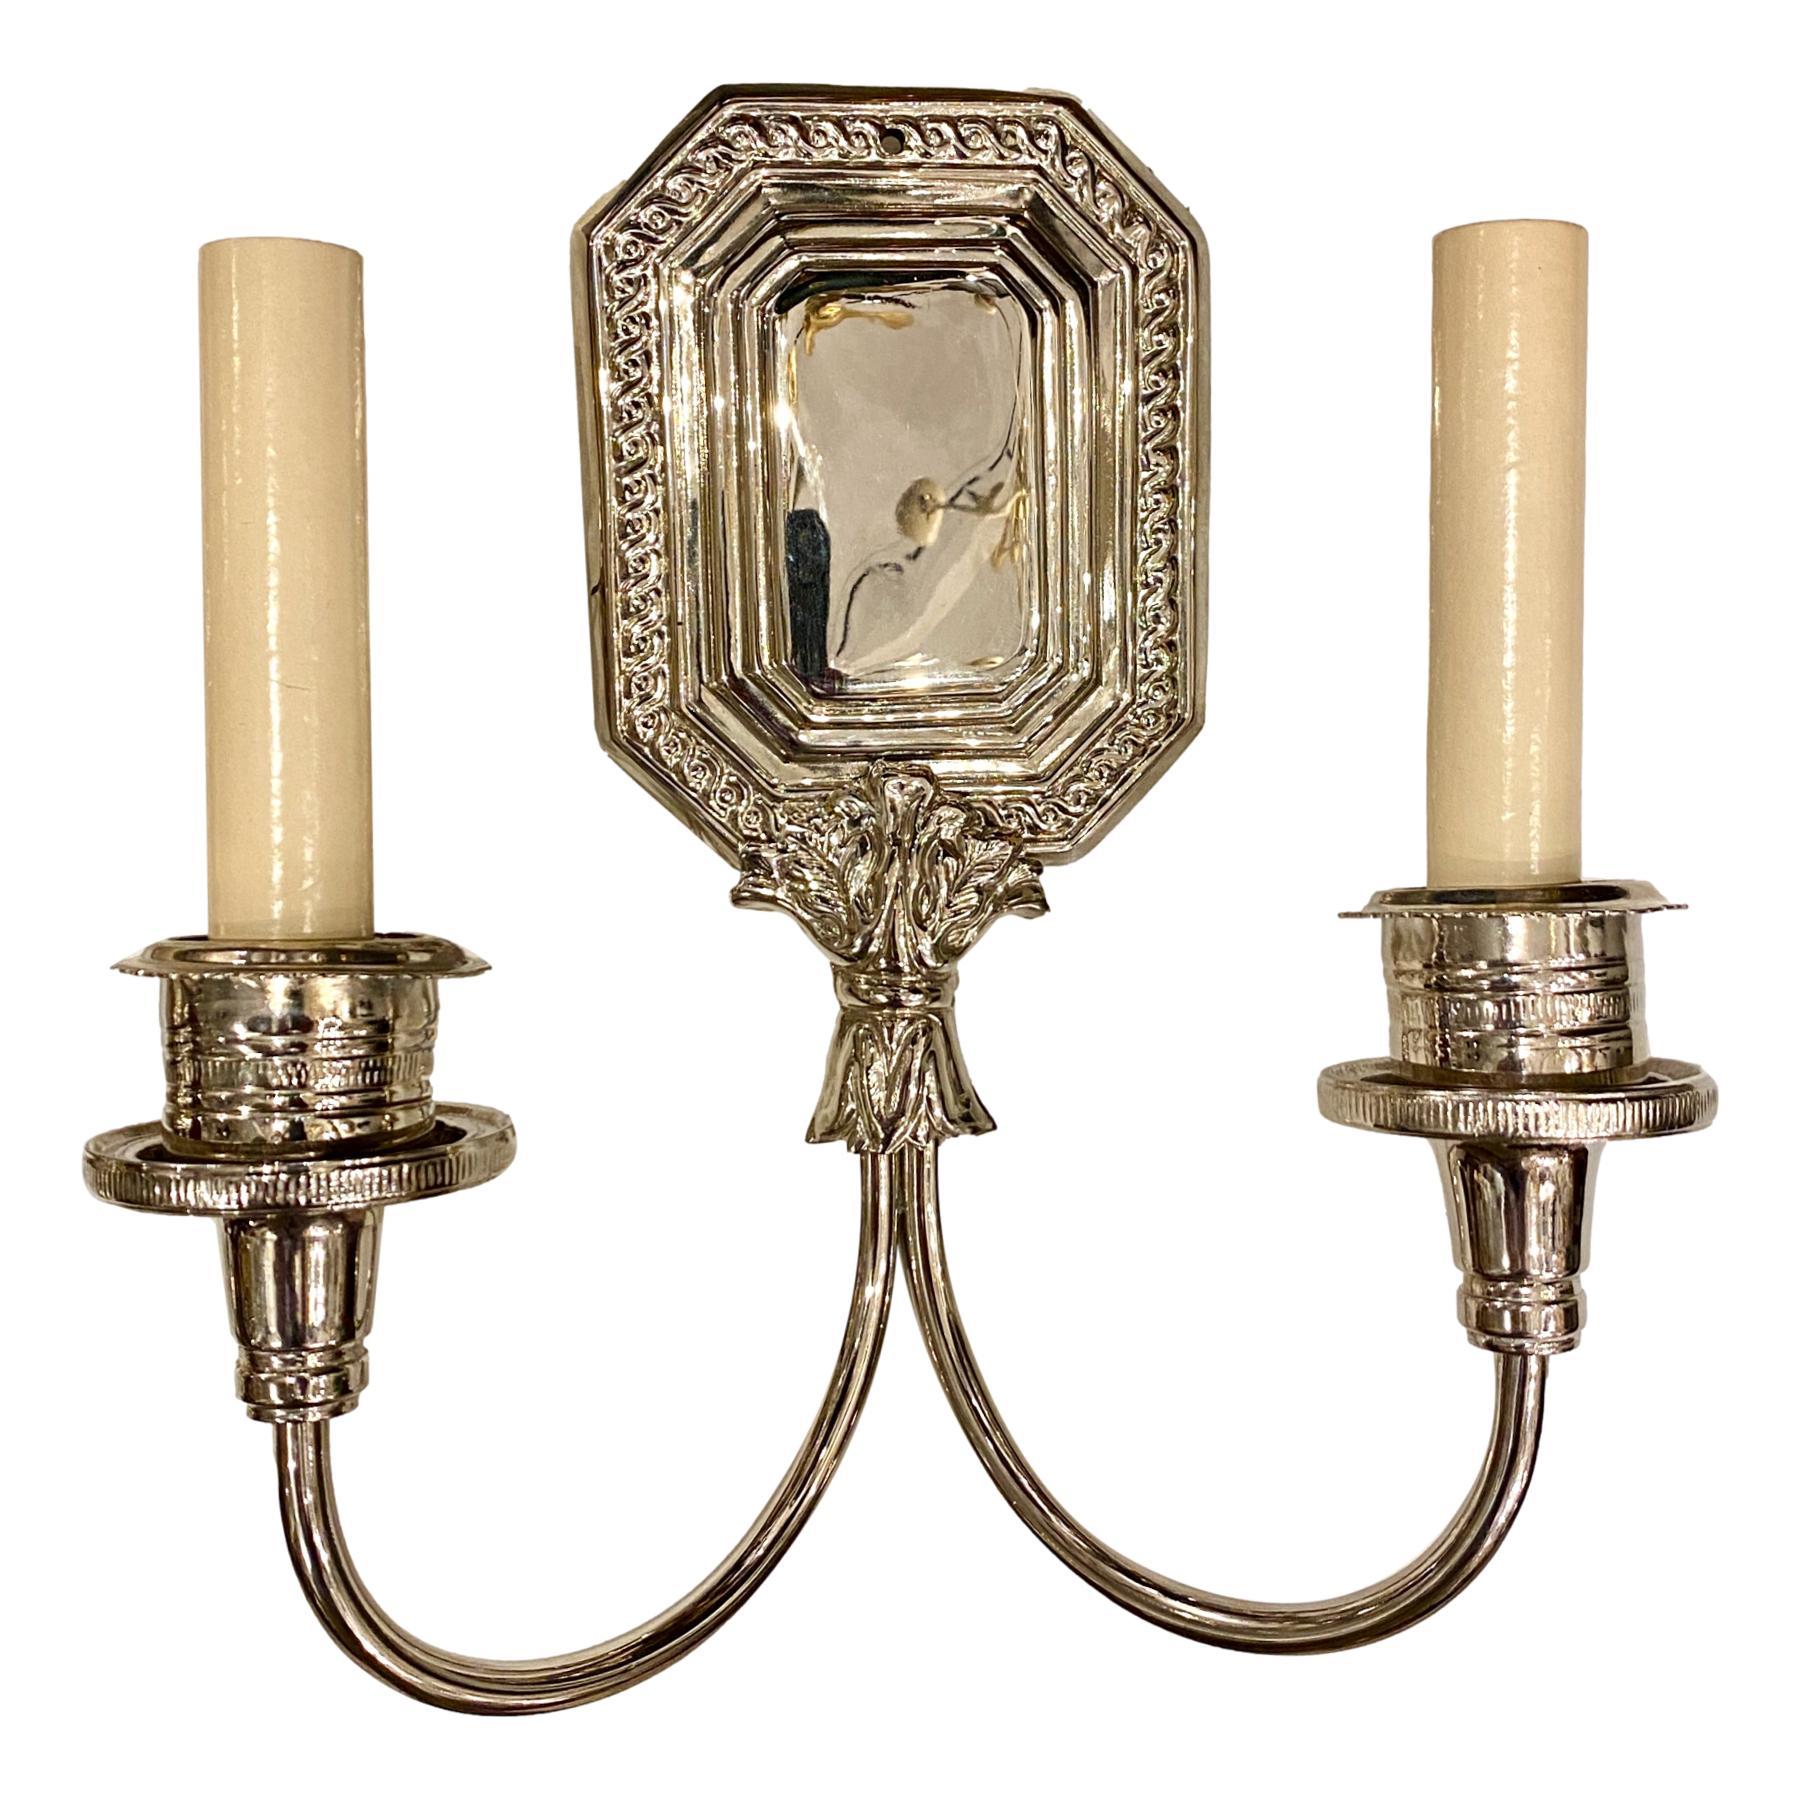 Mid-20th Century Pair of English Nickel-Plated Sconces